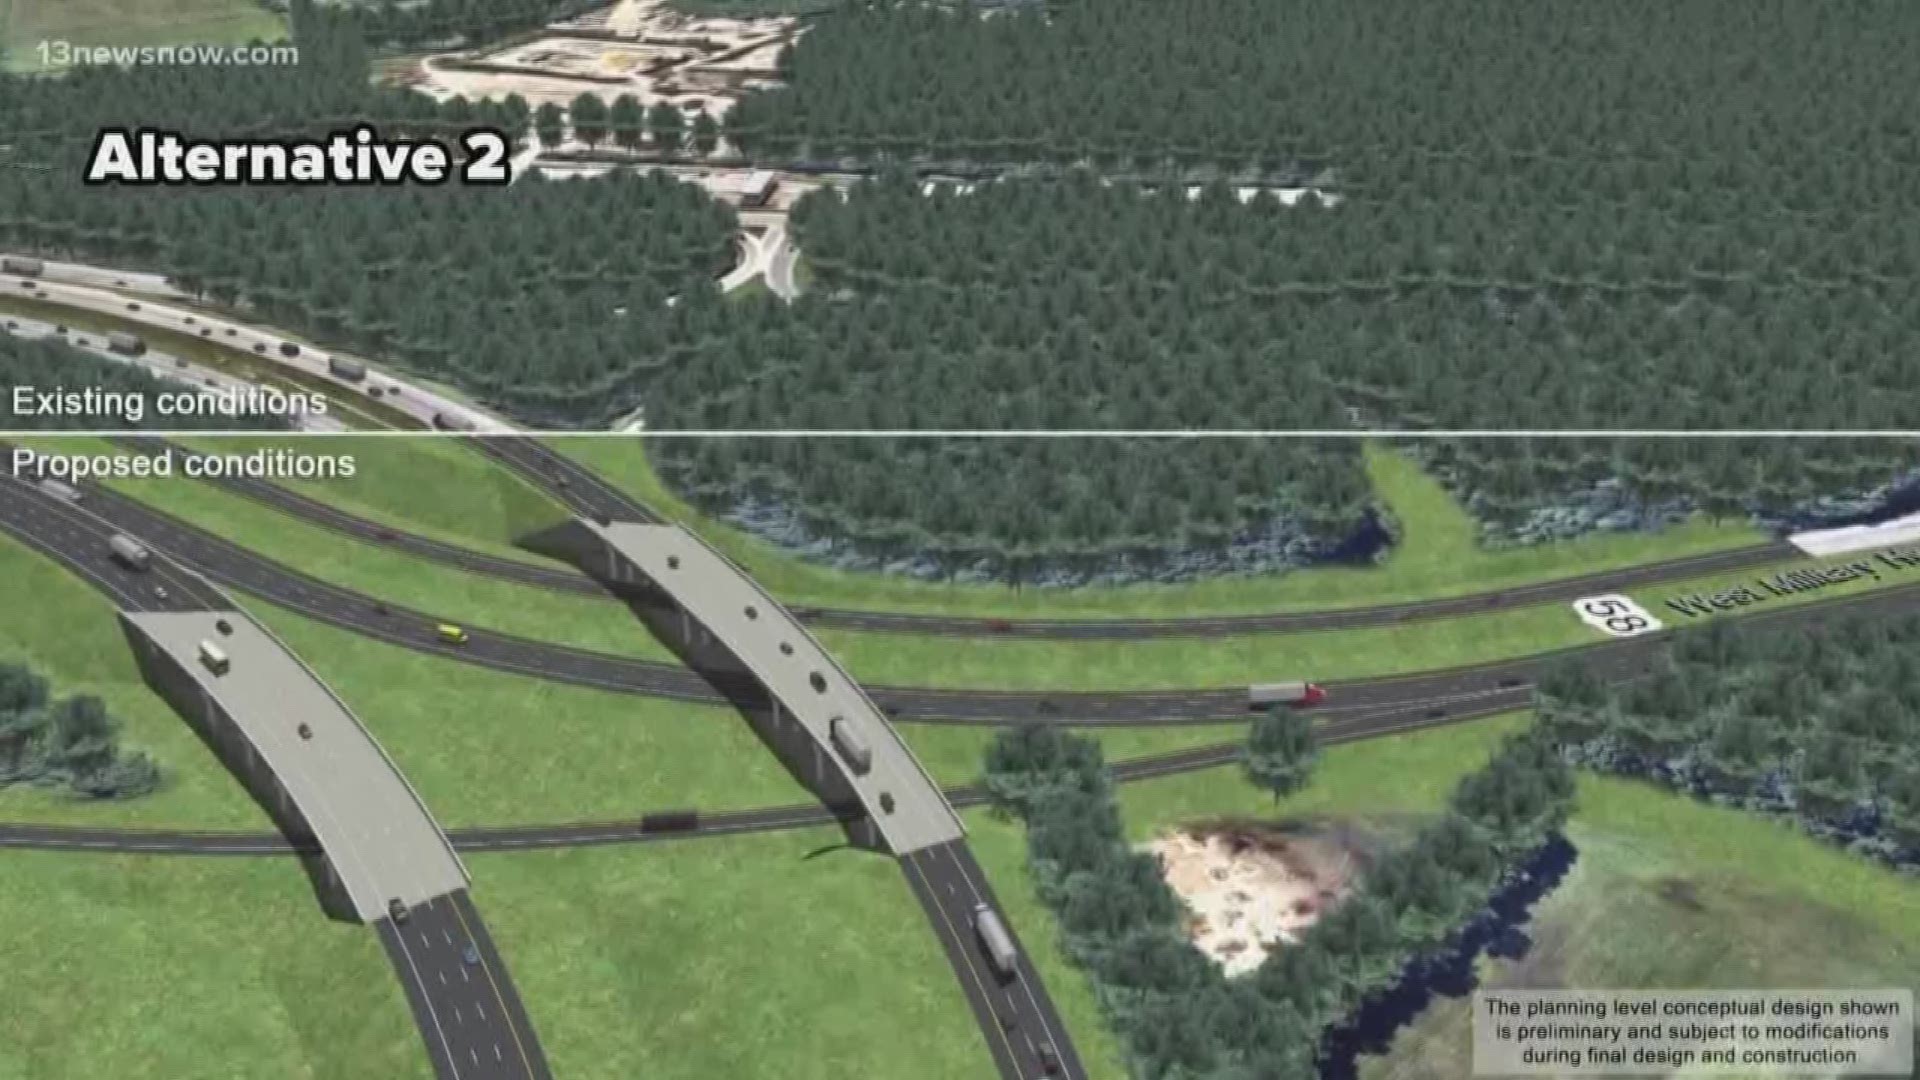 There are two proposals on the table regarding Improvements to the Bowers Hill Interchange.